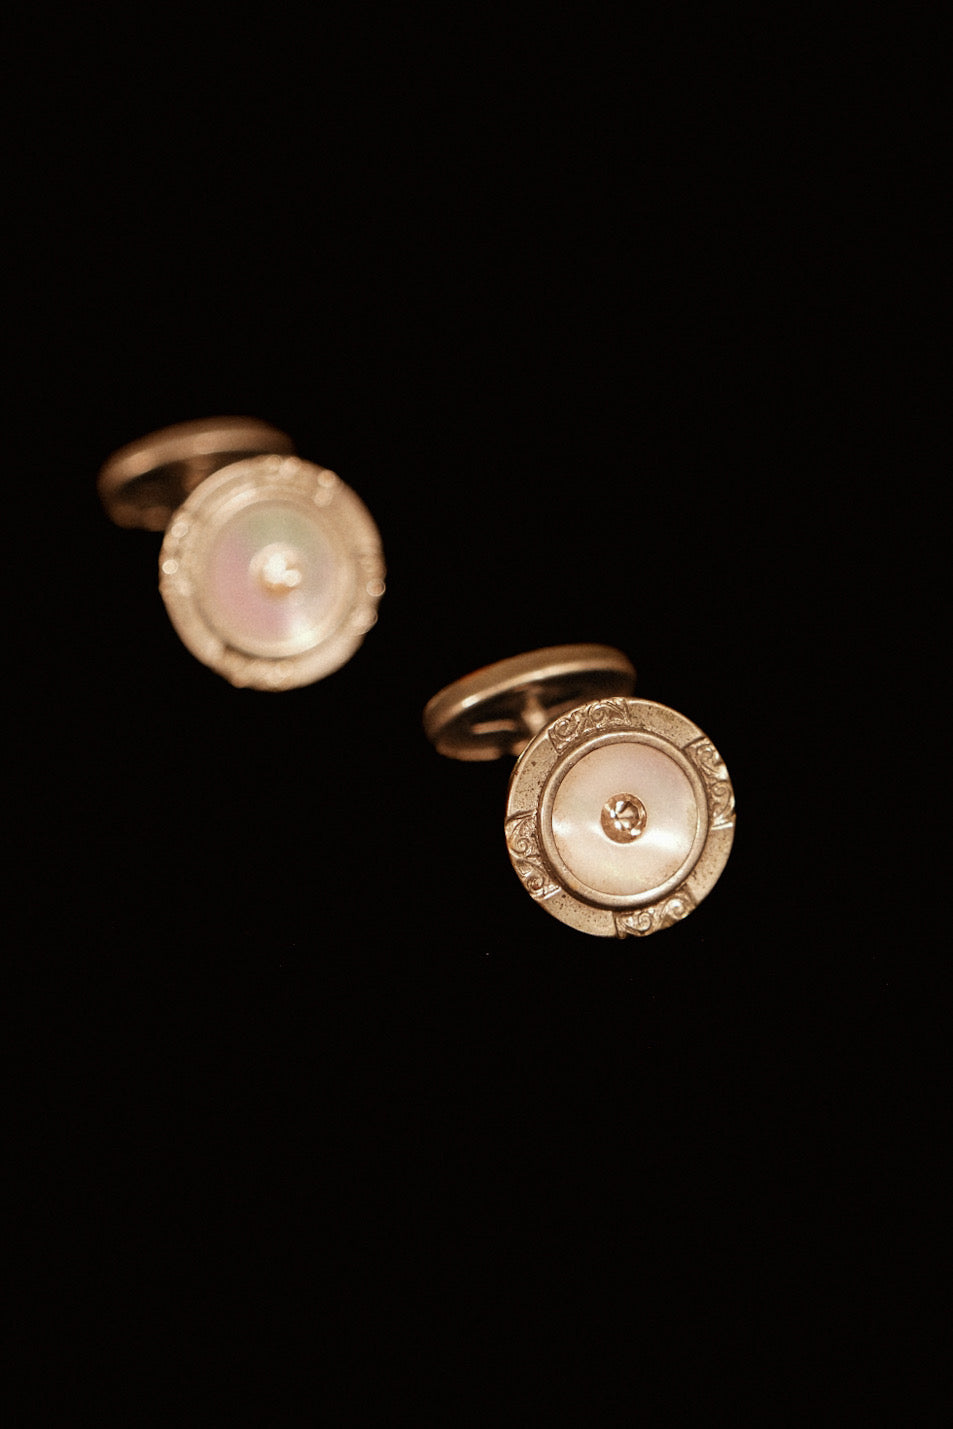 Art Deco 1920s Cufflinks Featuring A Crystal Framed By Mother Of Pearl